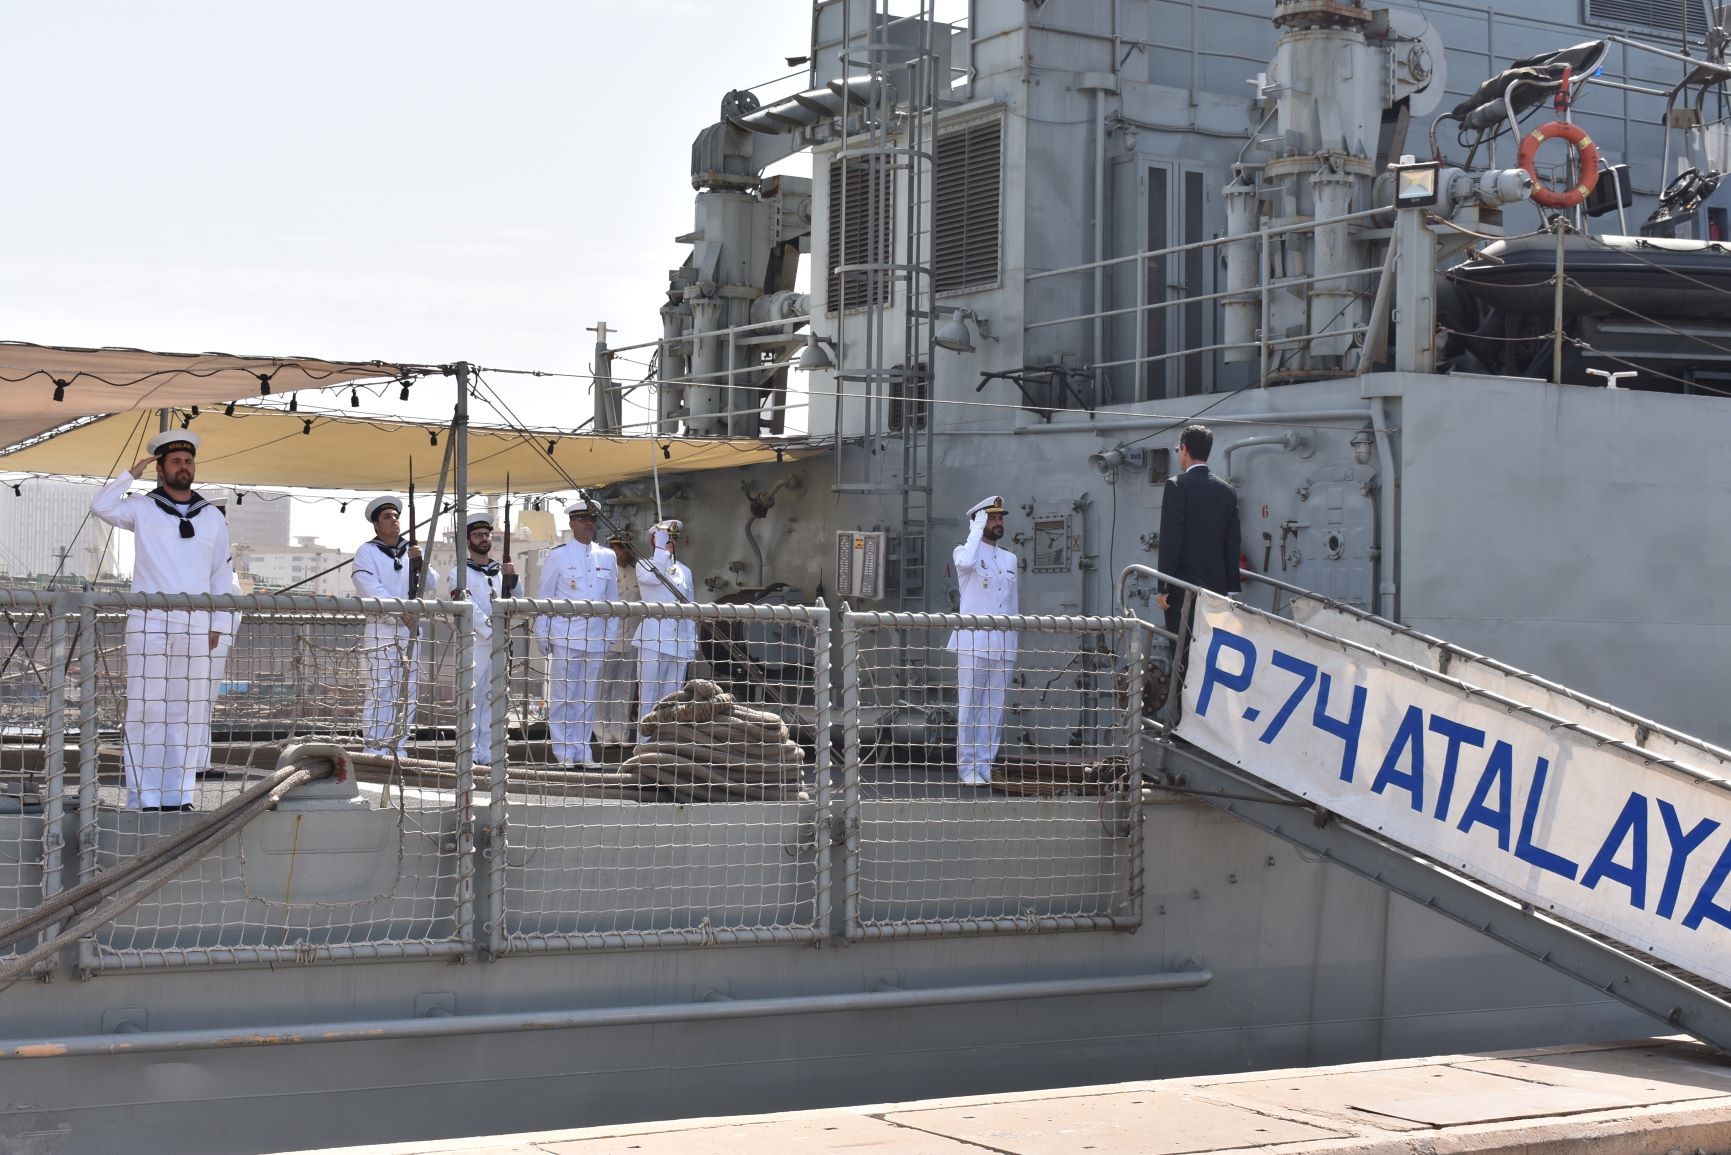 The patrol boat “Atalaya” cooperates with Senegal Armed Forces in Dakar